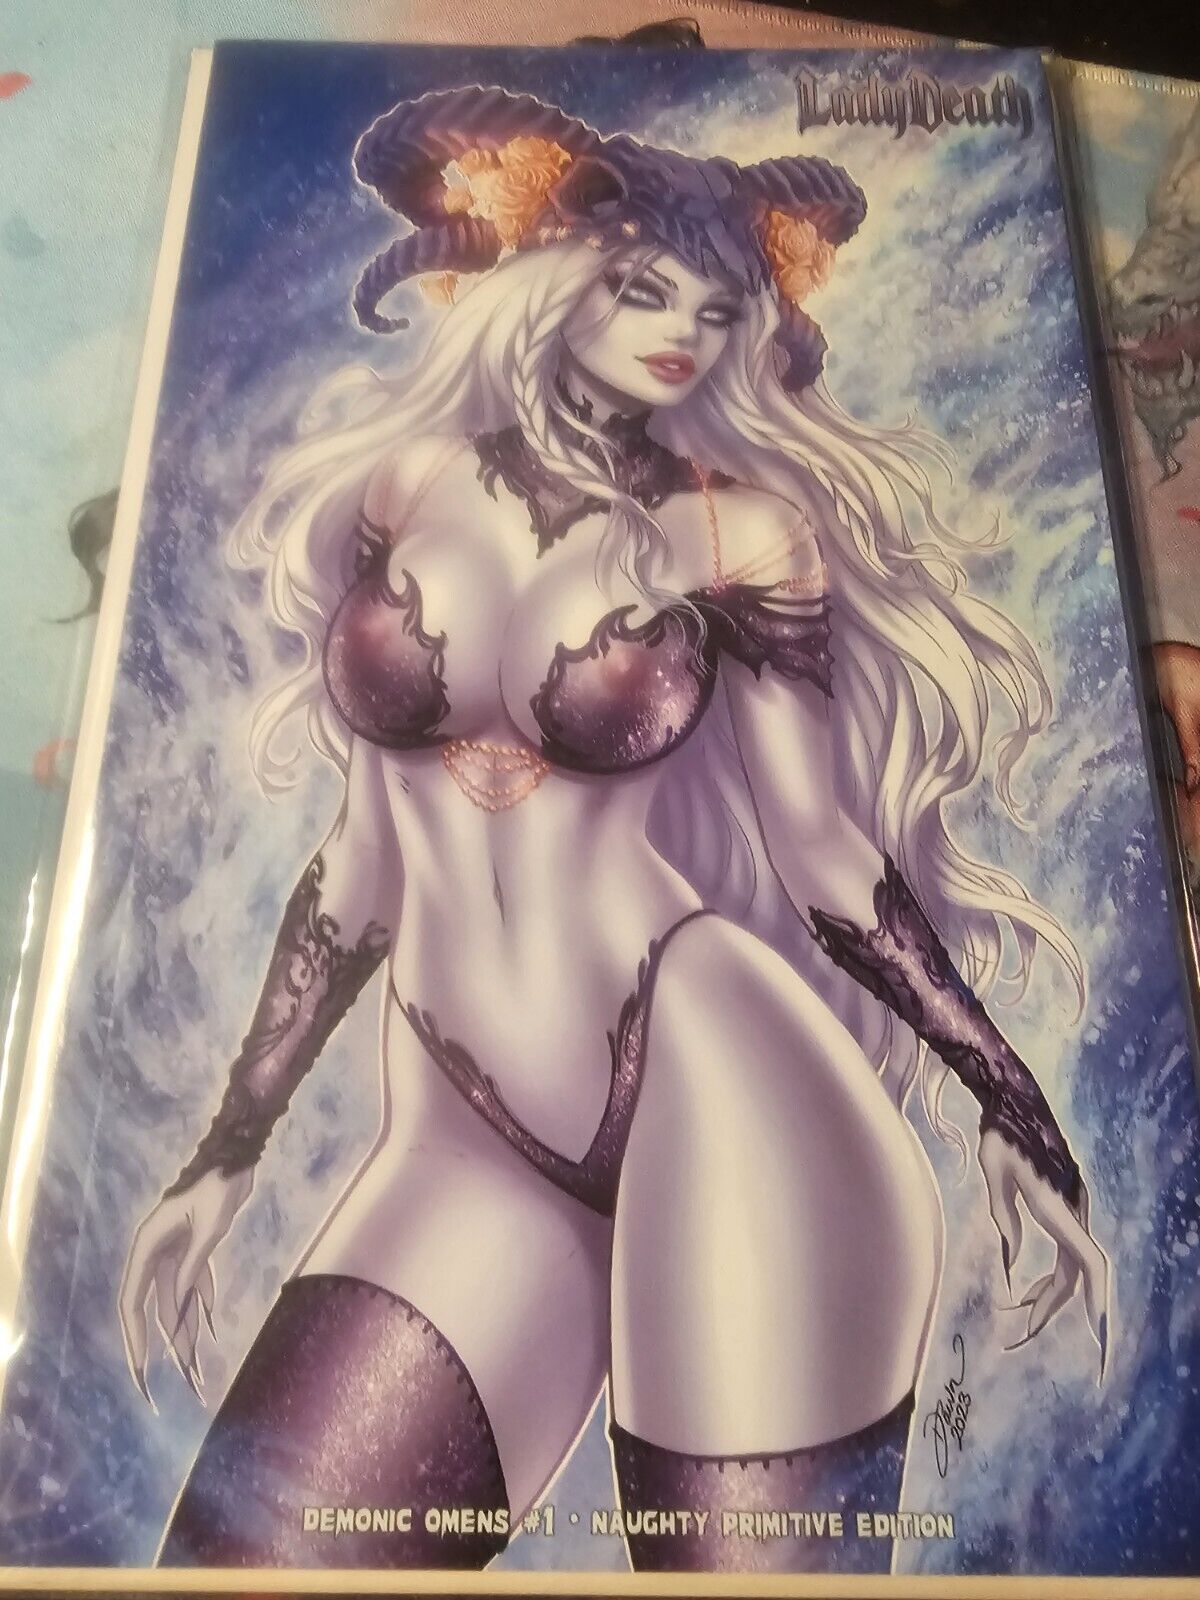 Lady Death Demonic Omens Kickstarter N@ughty Primitive cover by Dawn McTeigue